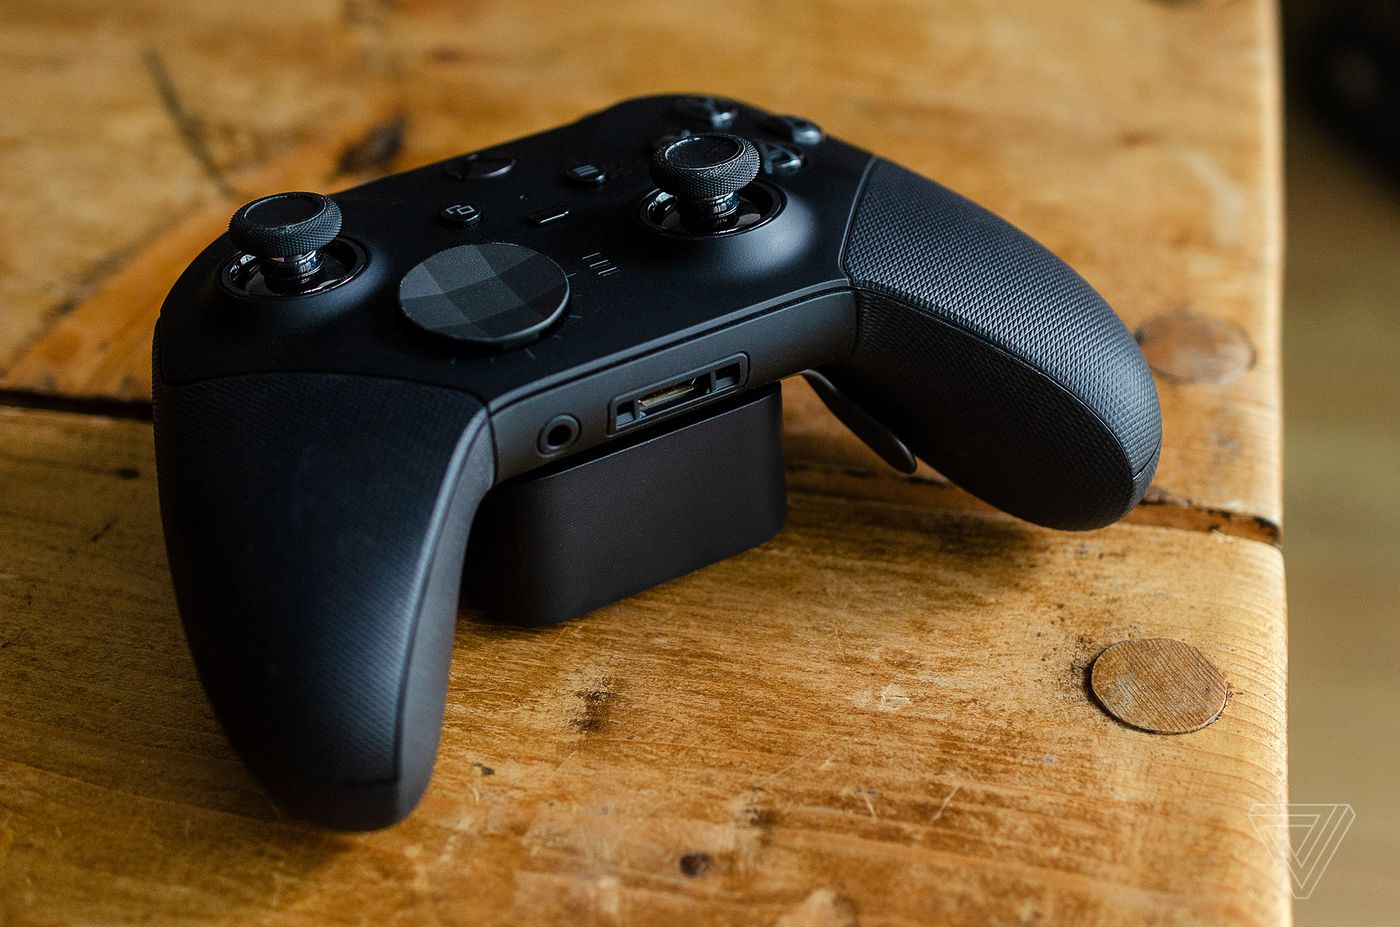 Xbox Elite Wireless Controller Series 2 Review The Verge